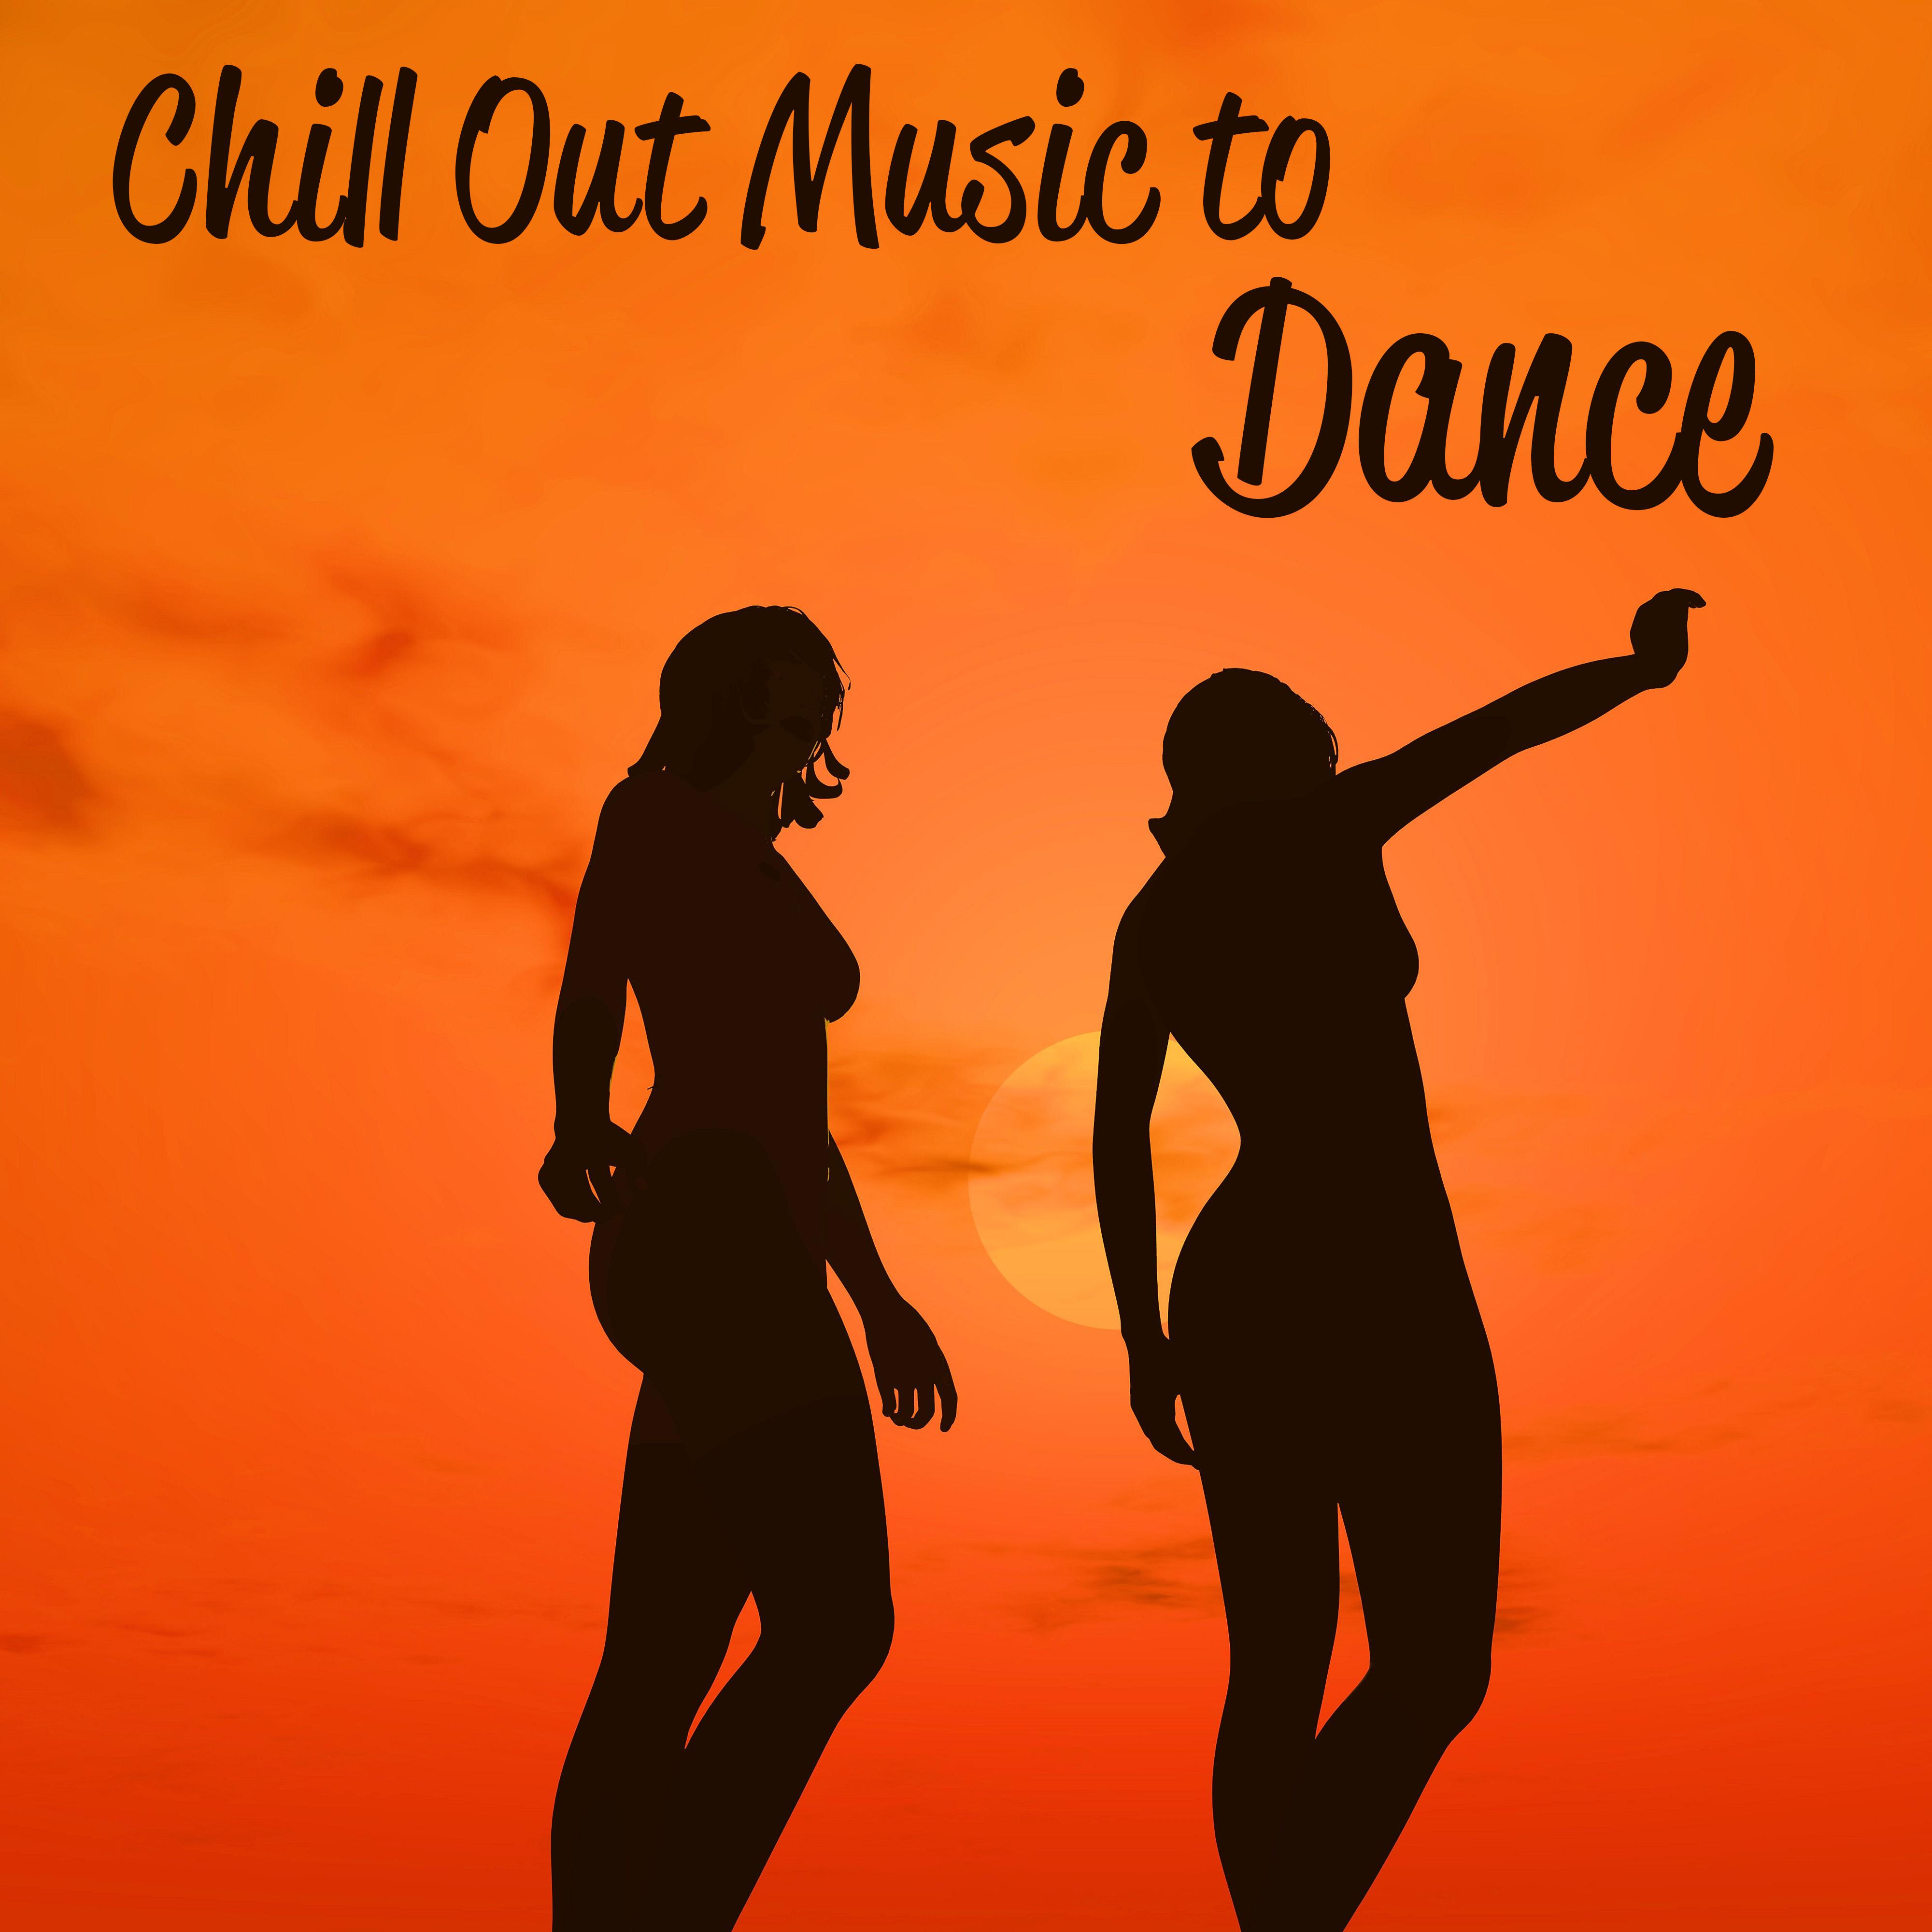 Chill Out Music to Dance – Ibiza Party Time, Summer Fun, Sunny Beach, Chill Out Vibes